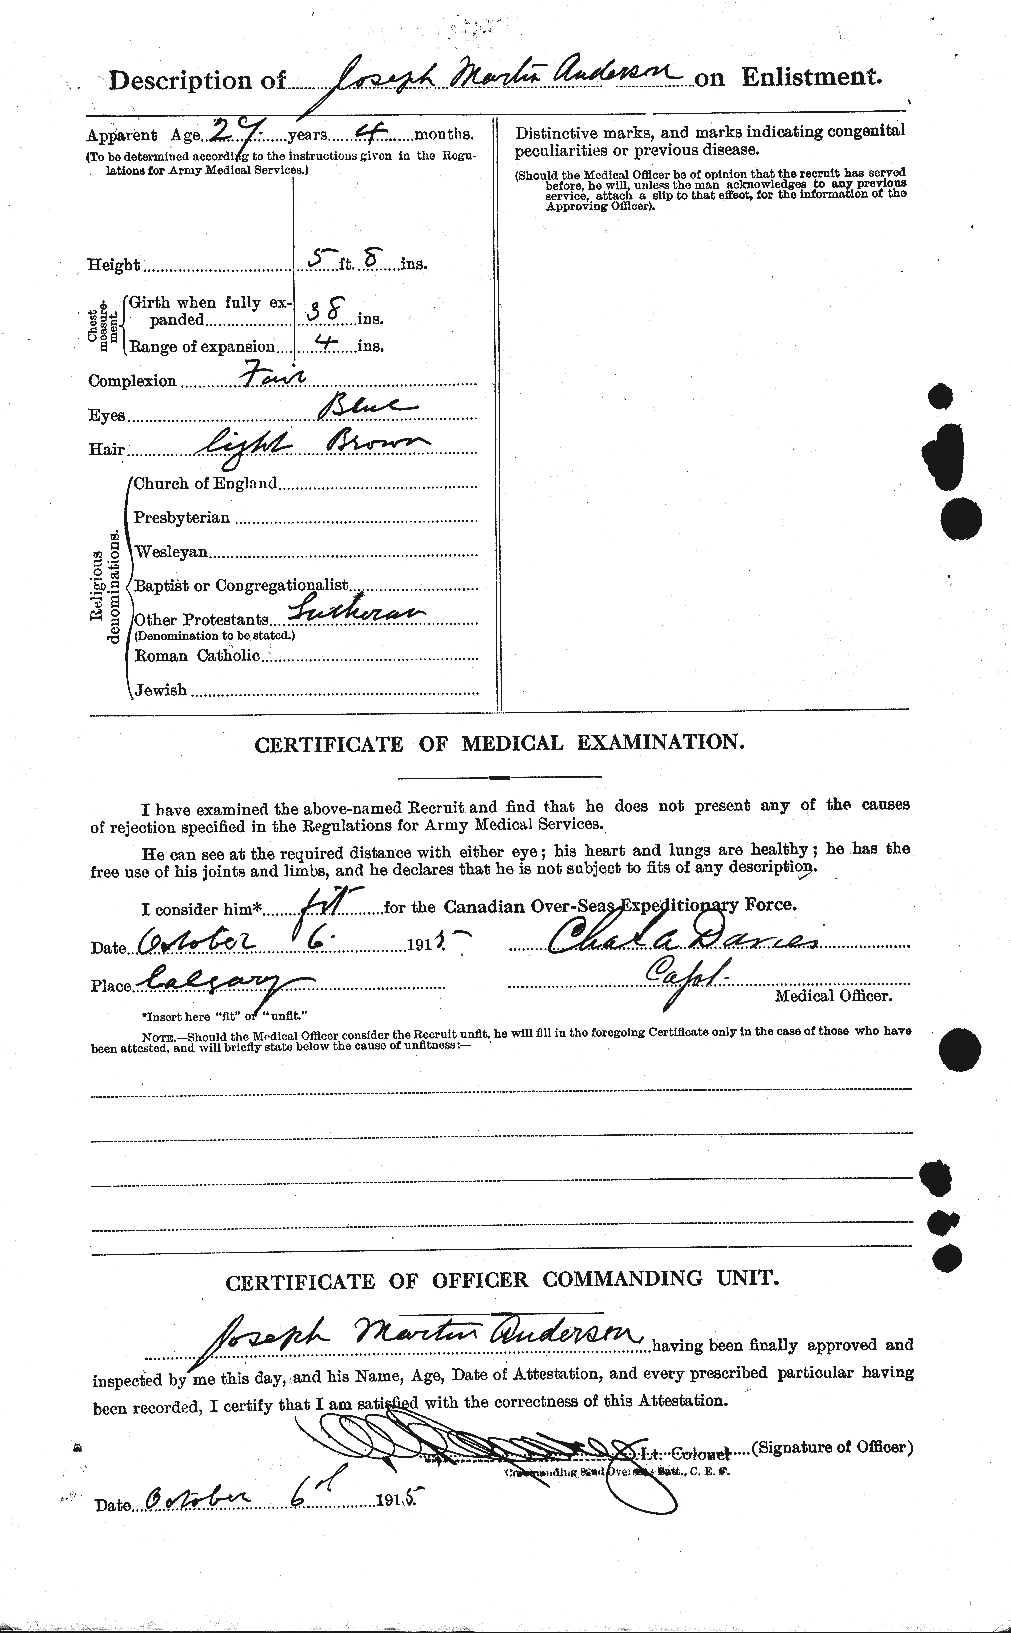 Personnel Records of the First World War - CEF 207560b